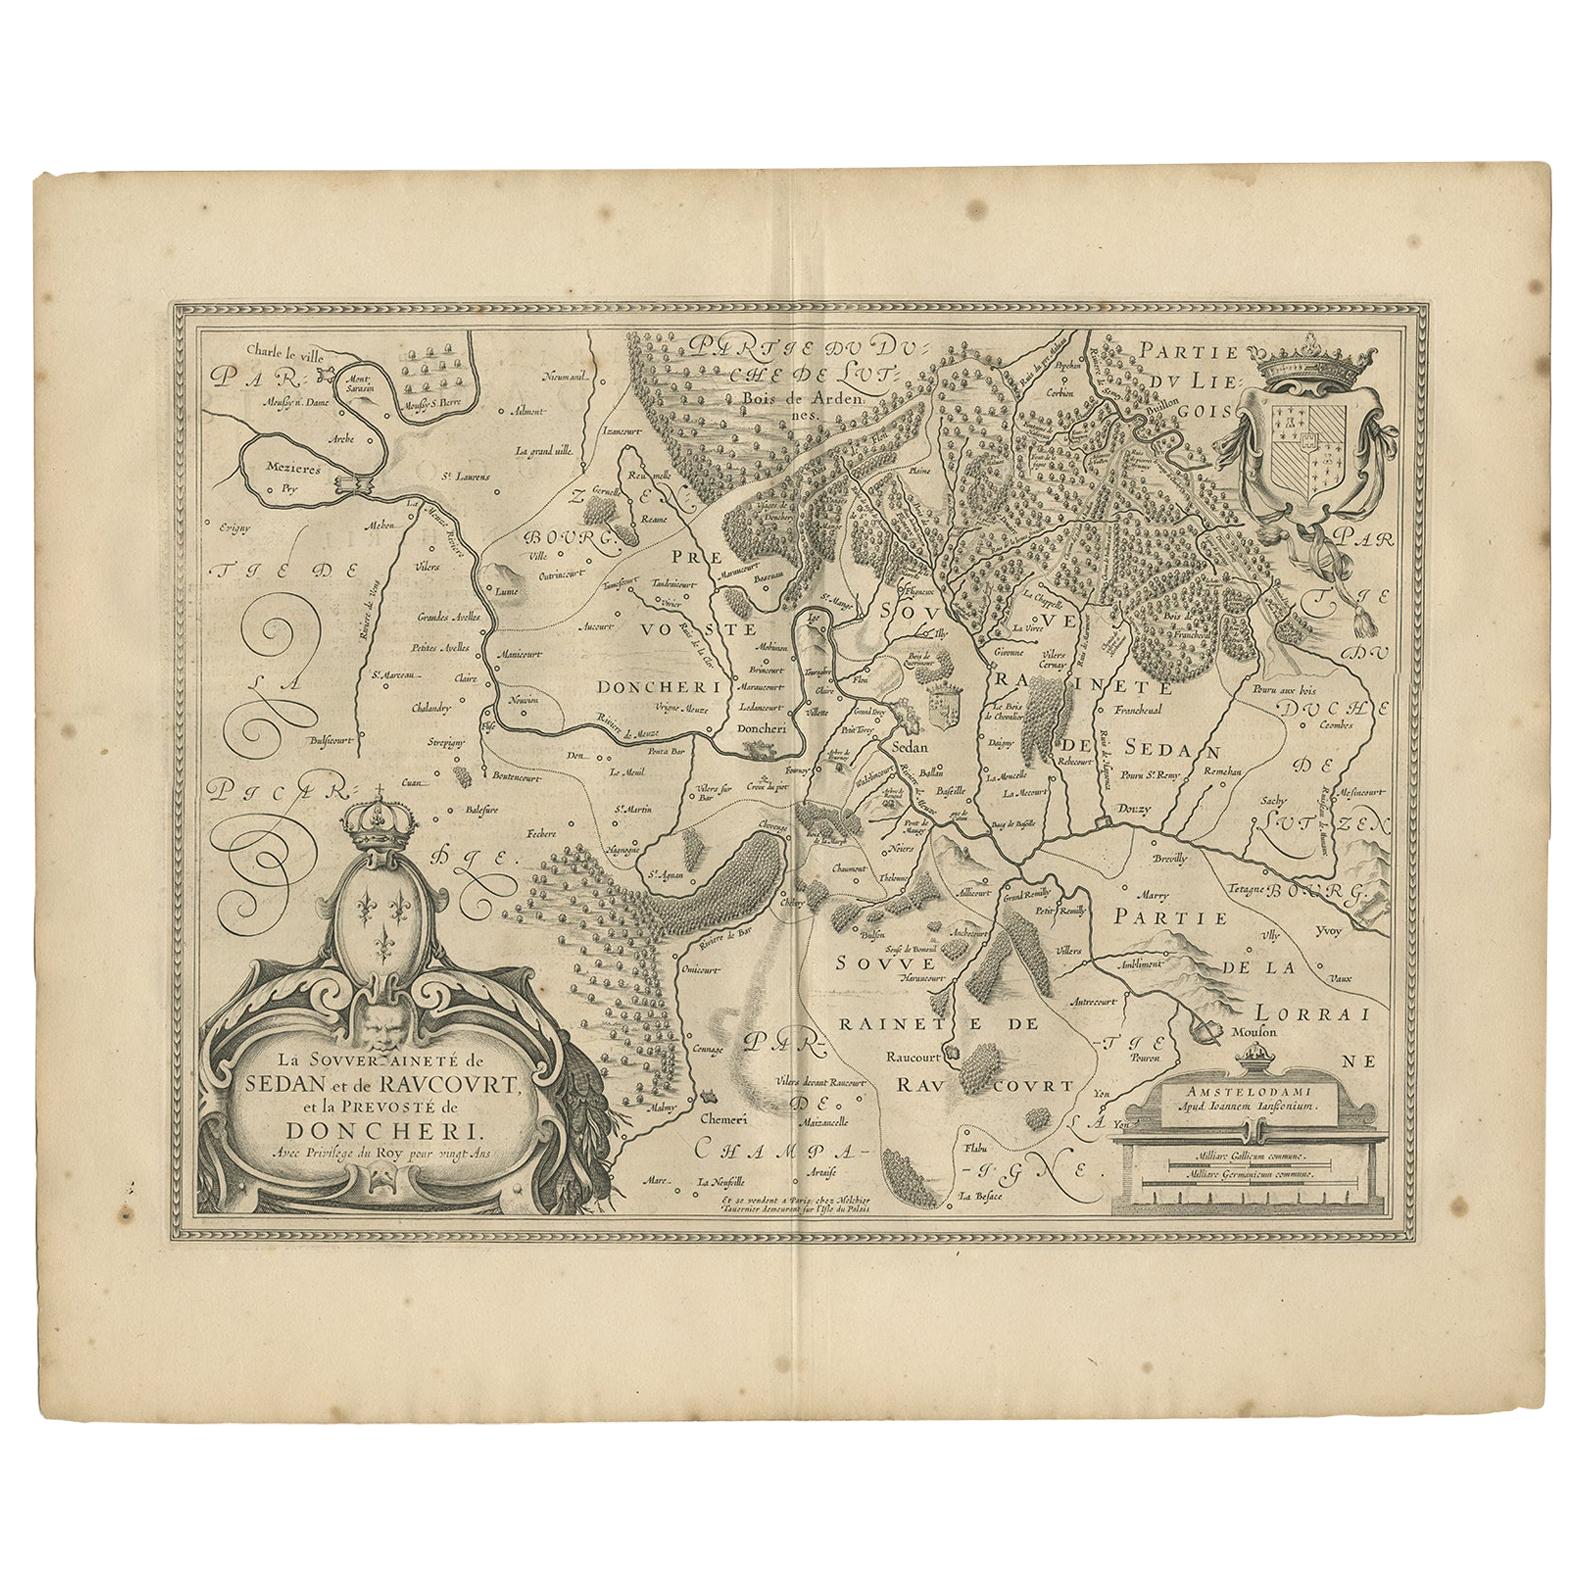 Antique Map of the Region of Sedan and Doncheri by Janssonius, 1657